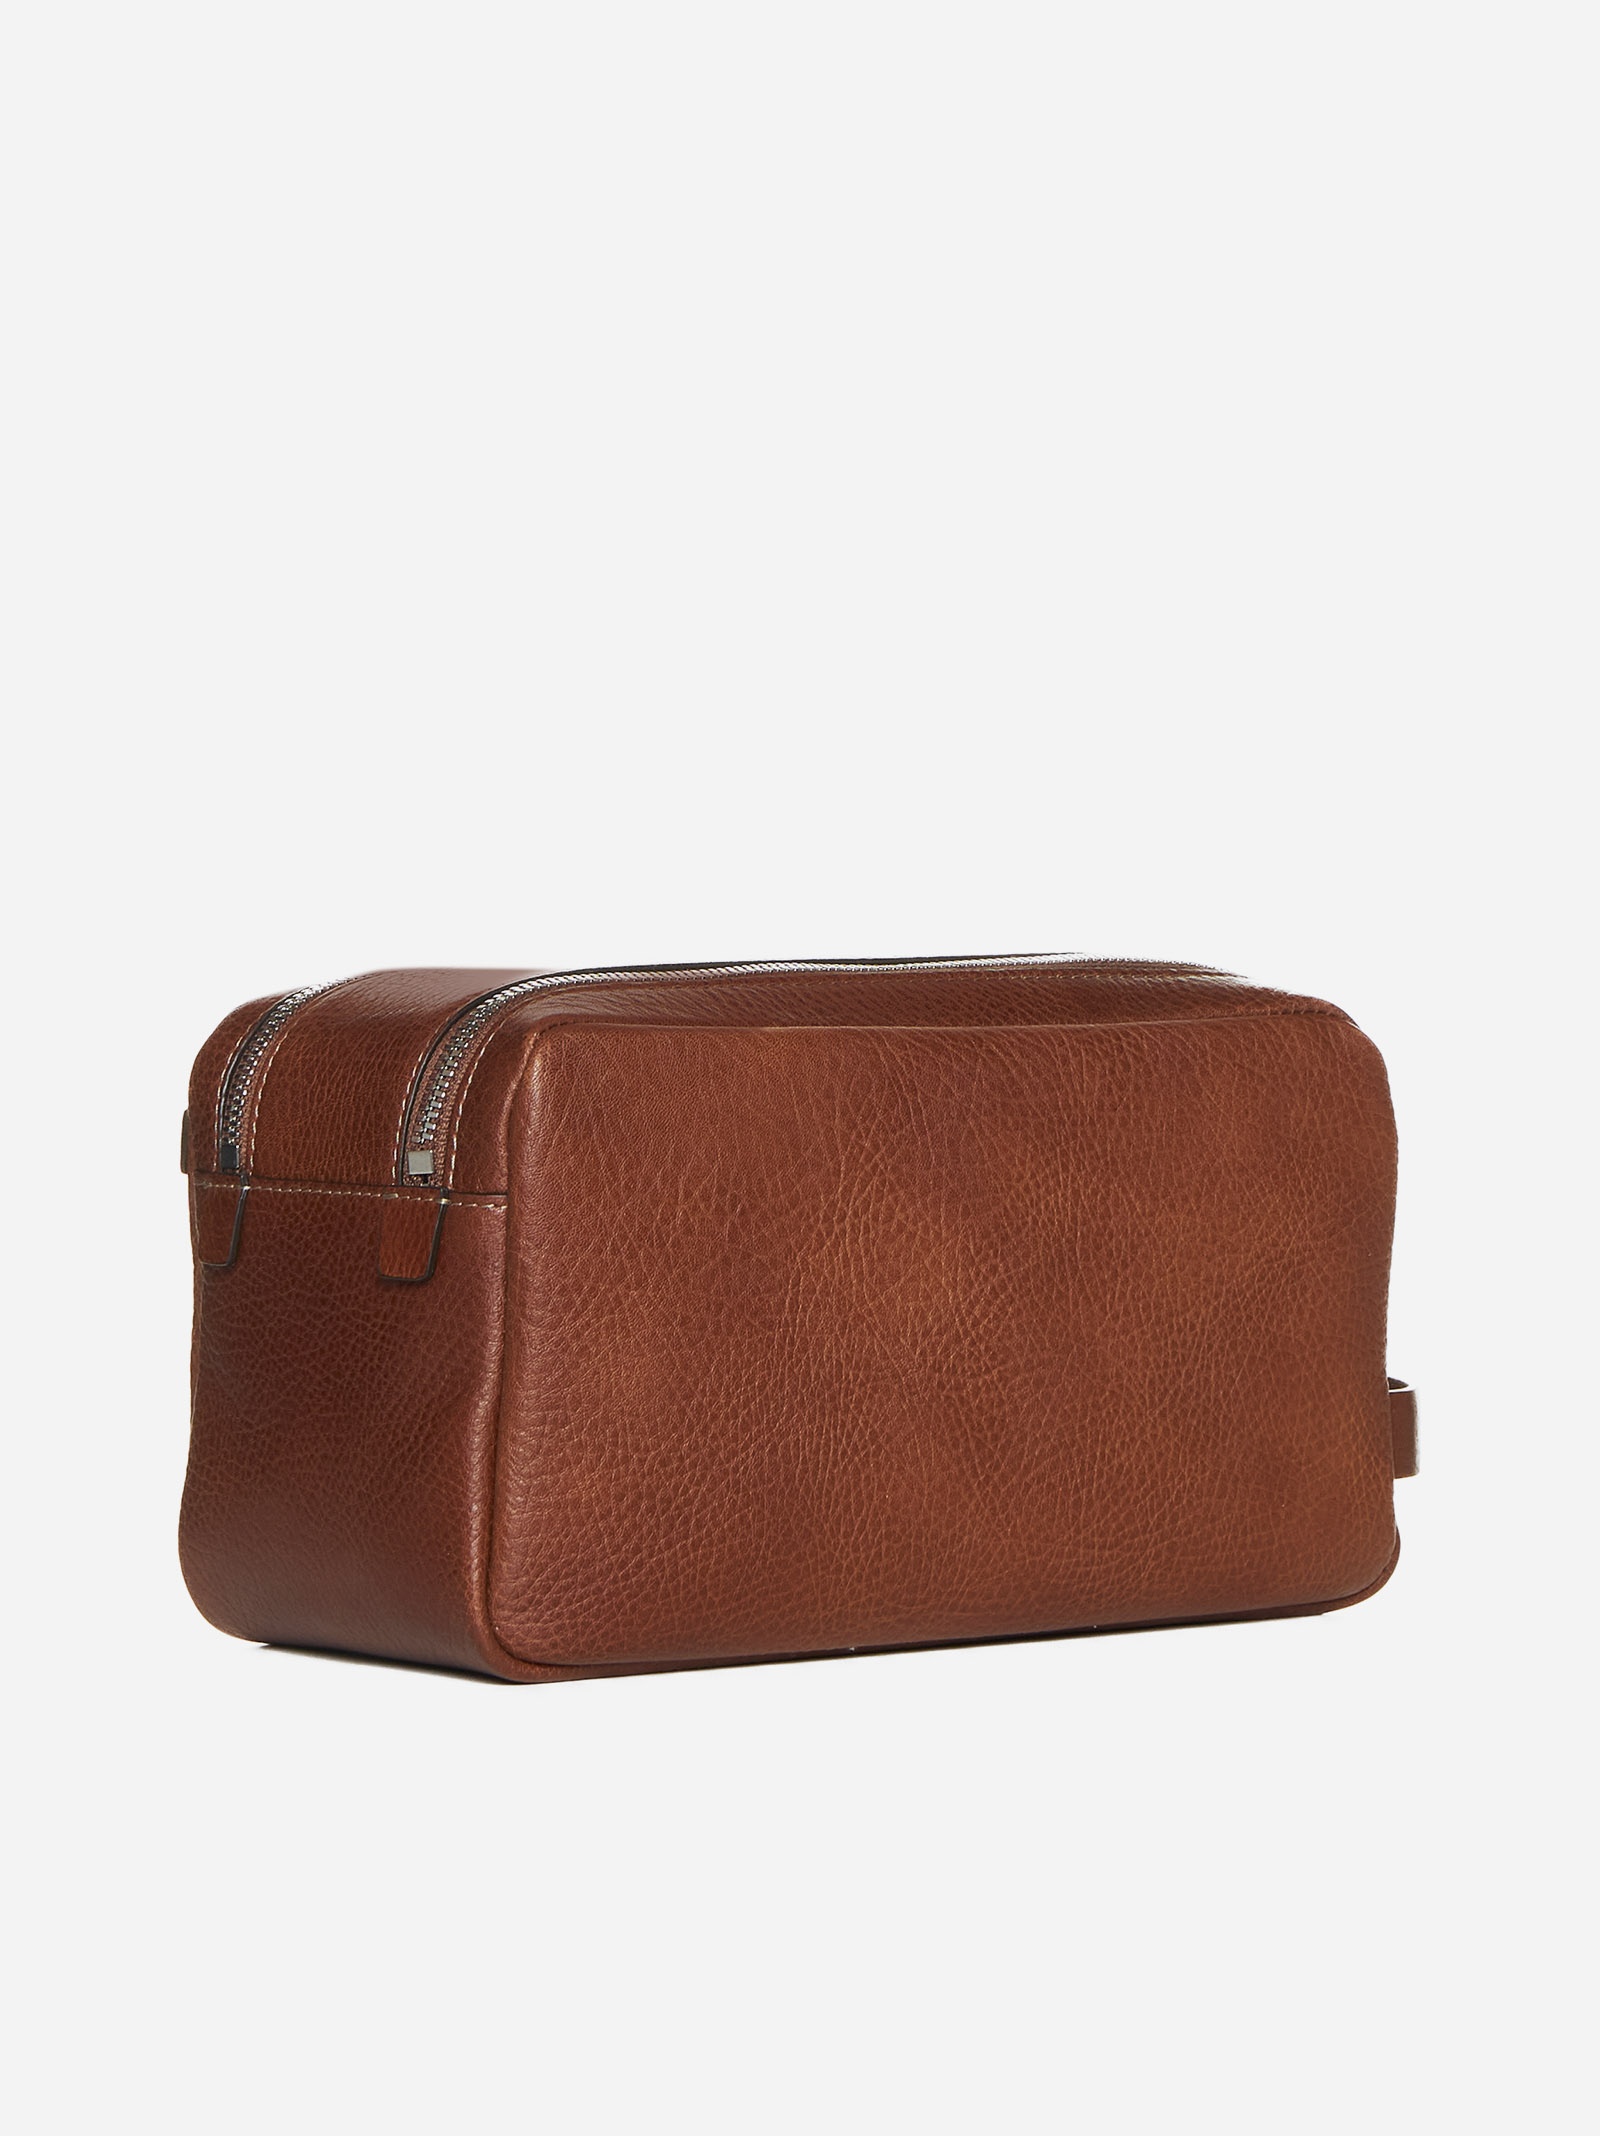 Leather toiletry bag - 3